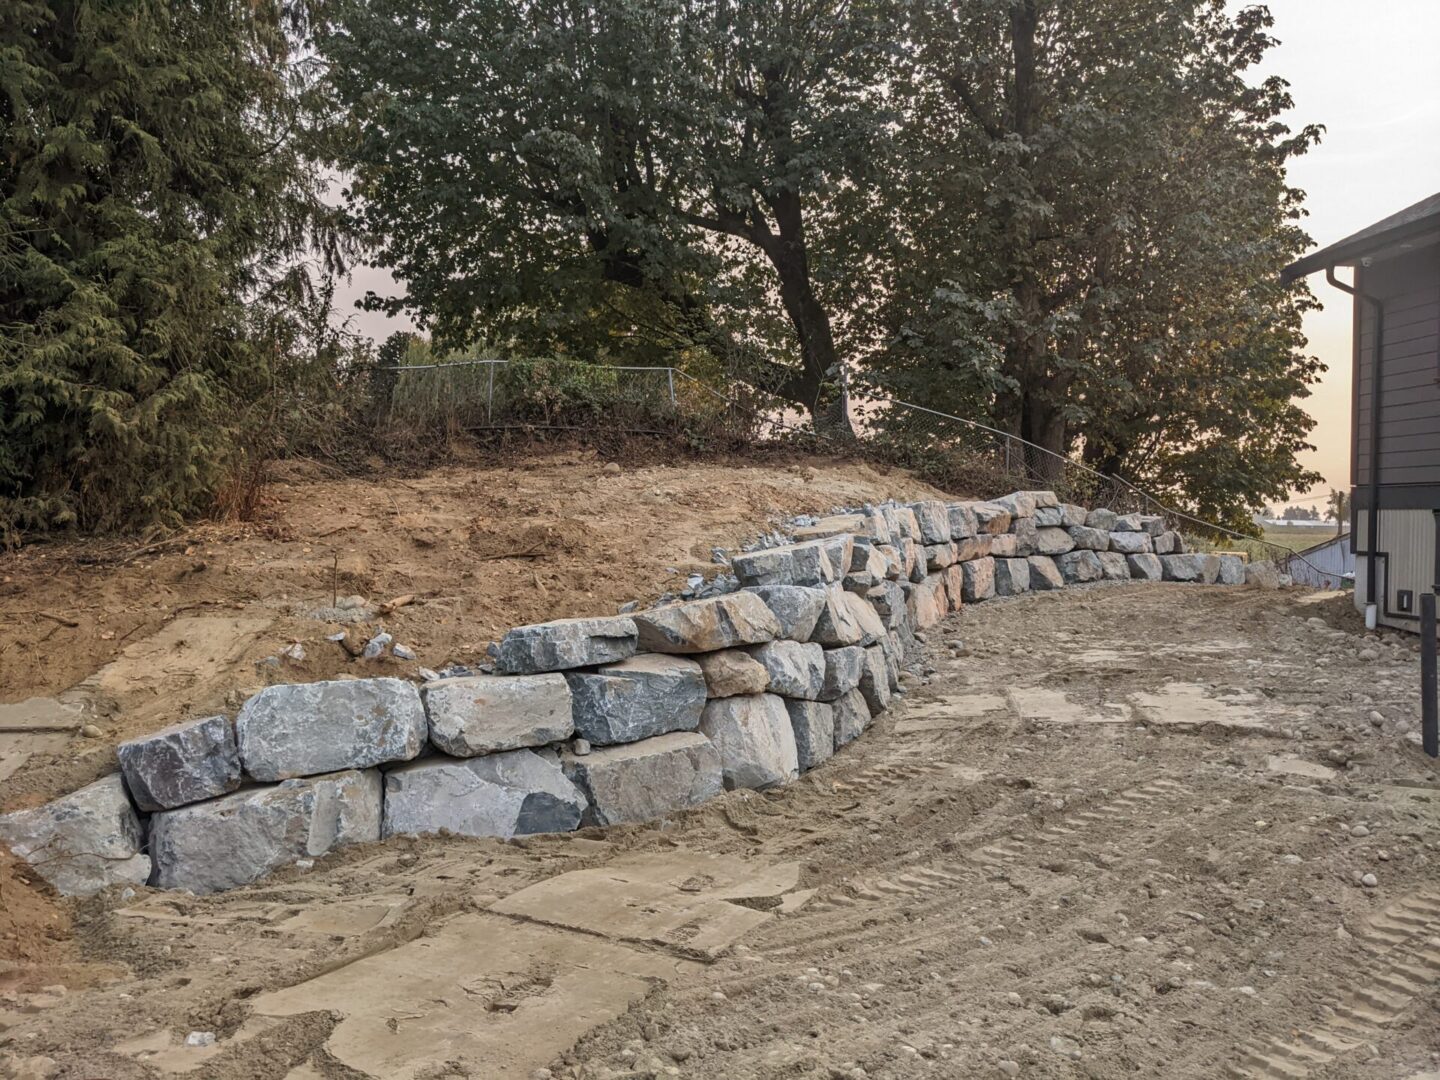 A newly constructed grey stone retaining wall on a dirt embankment next to a building, with trees in the background under a hazy sky.